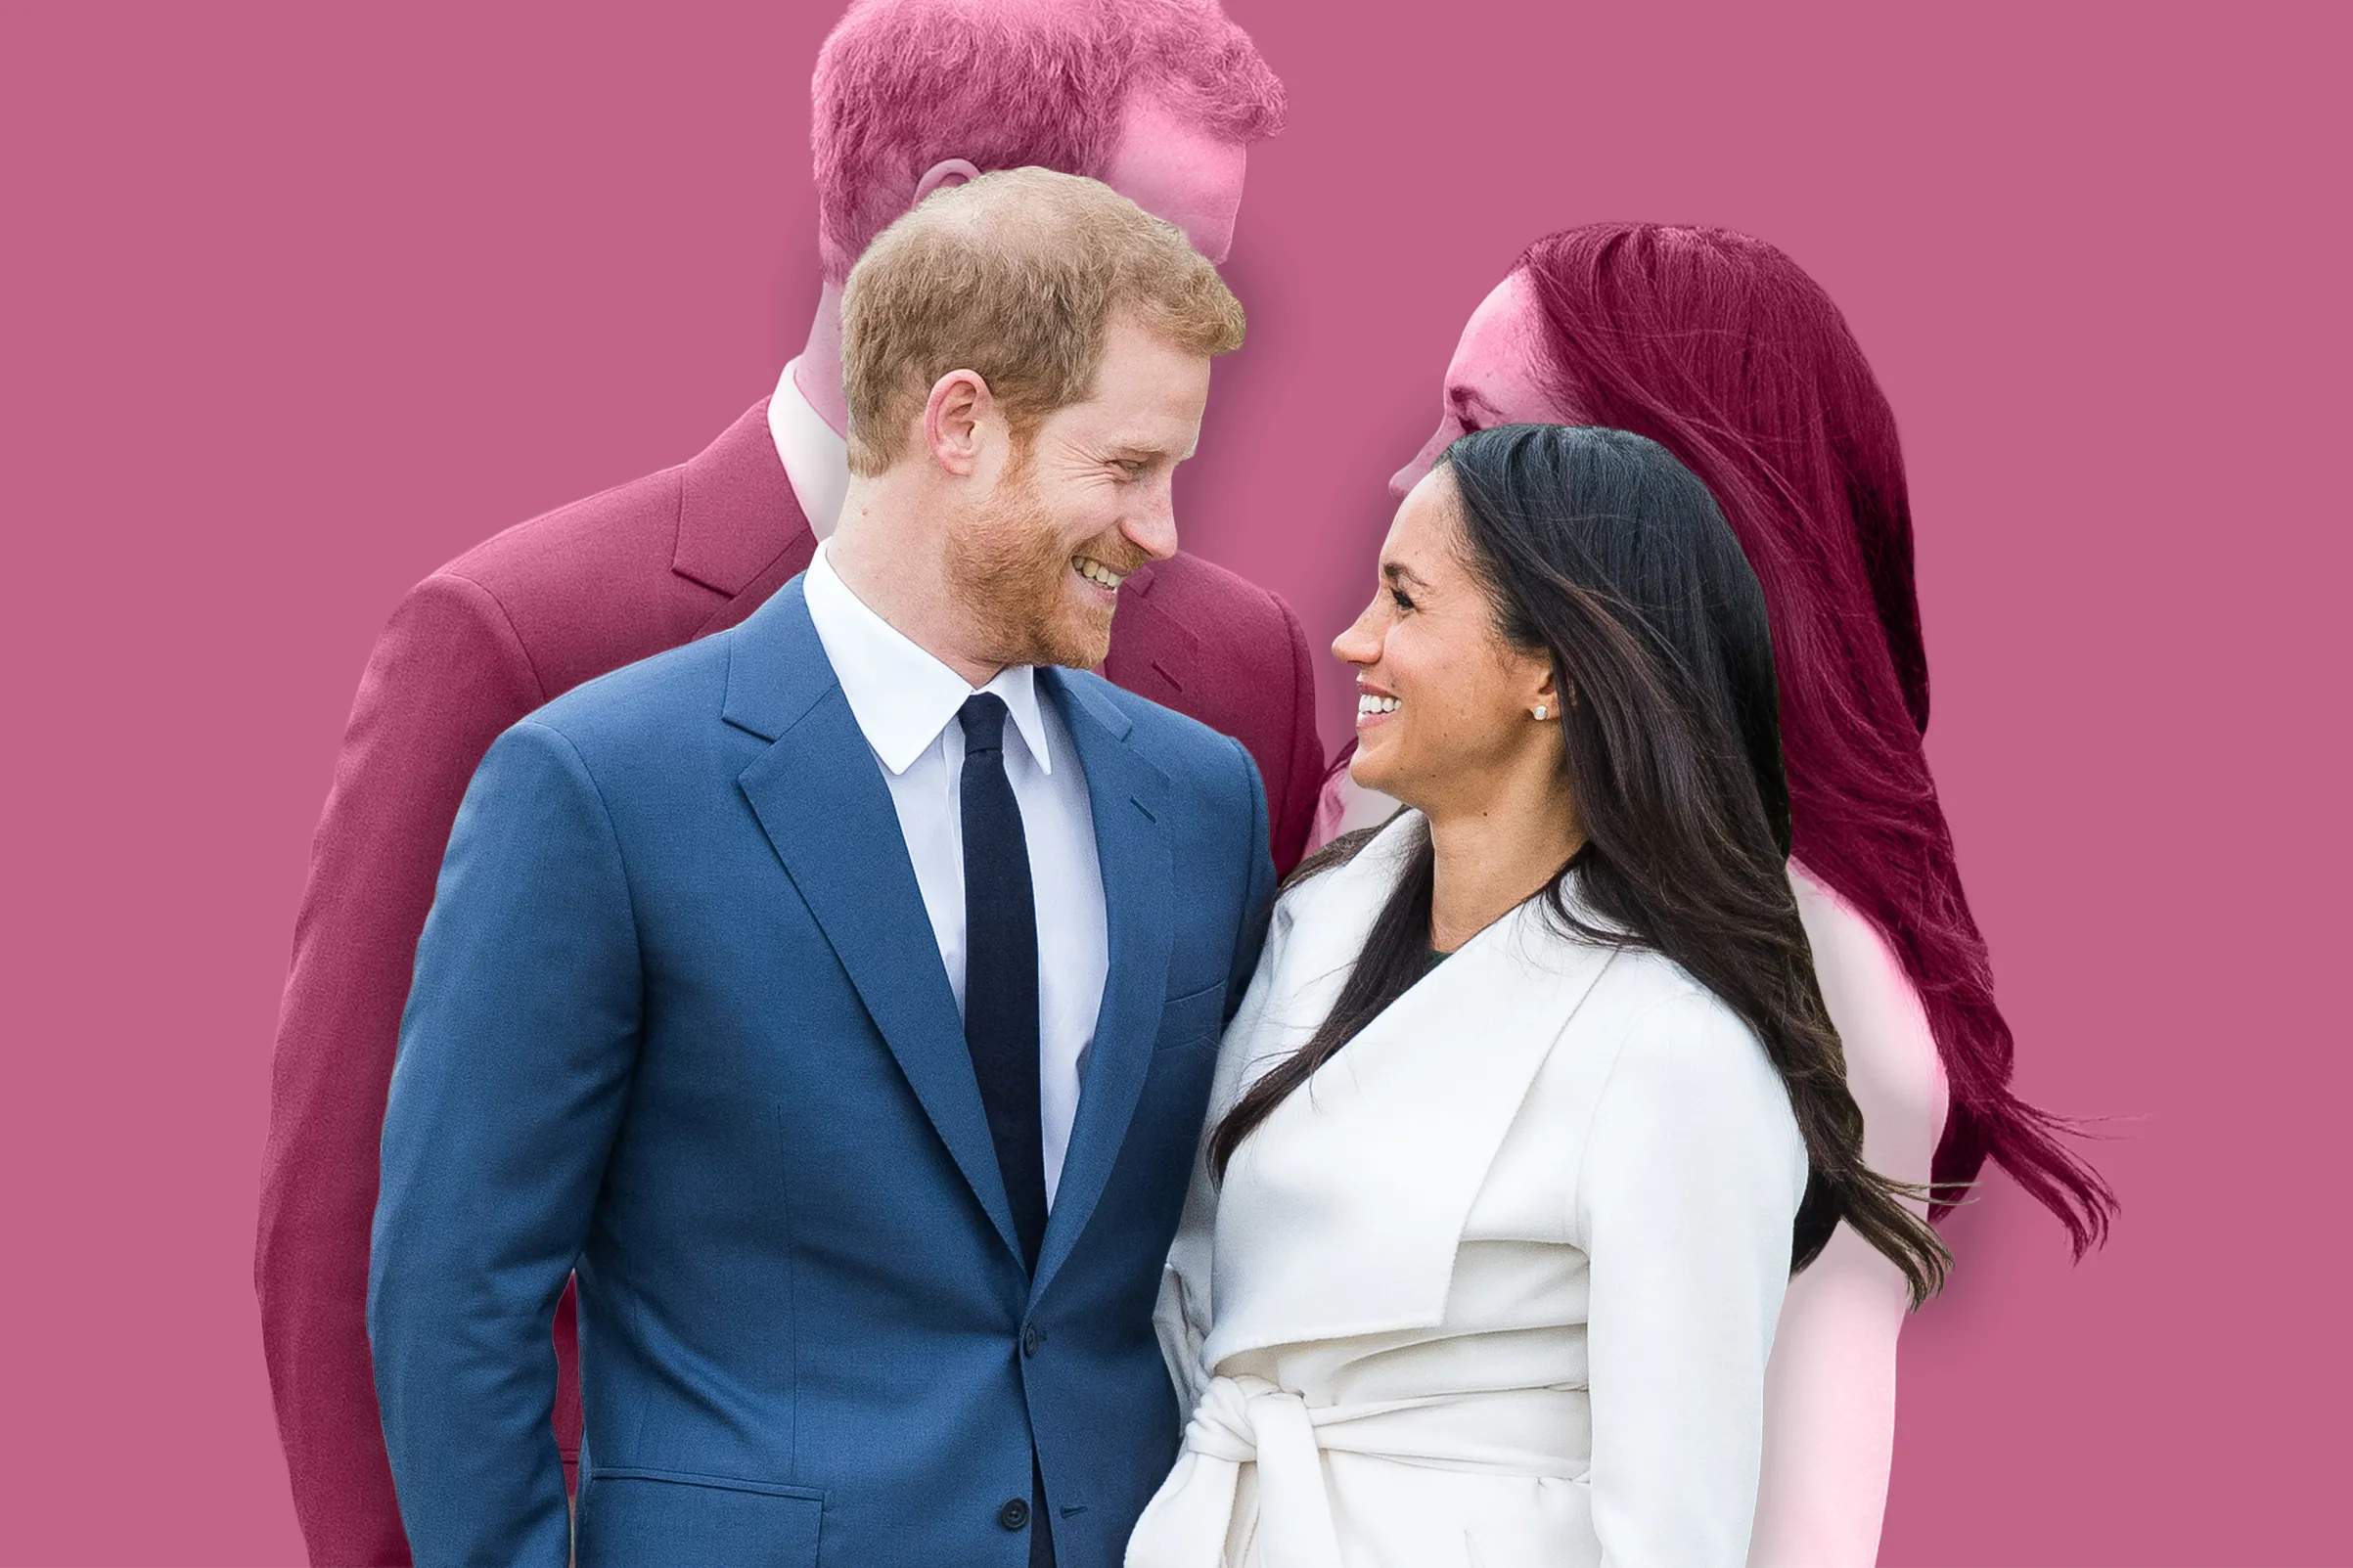 Prince Harry and Meghan Markle Are Royally Rich. Here's Everything We Know About Their Fortune